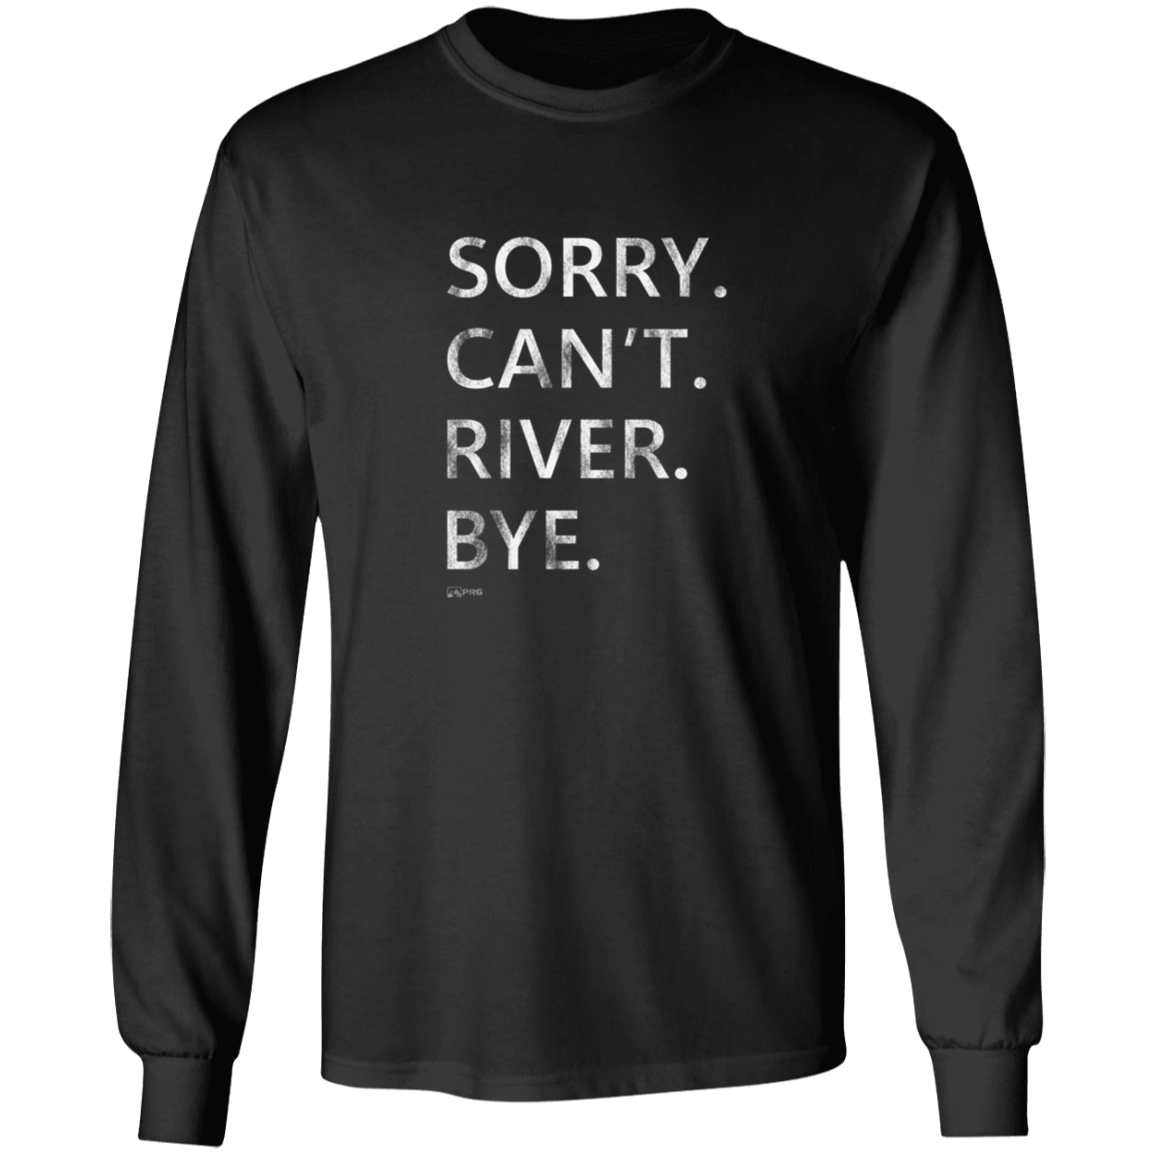 Sorry. Can't. River. Bye. - Long Sleeve